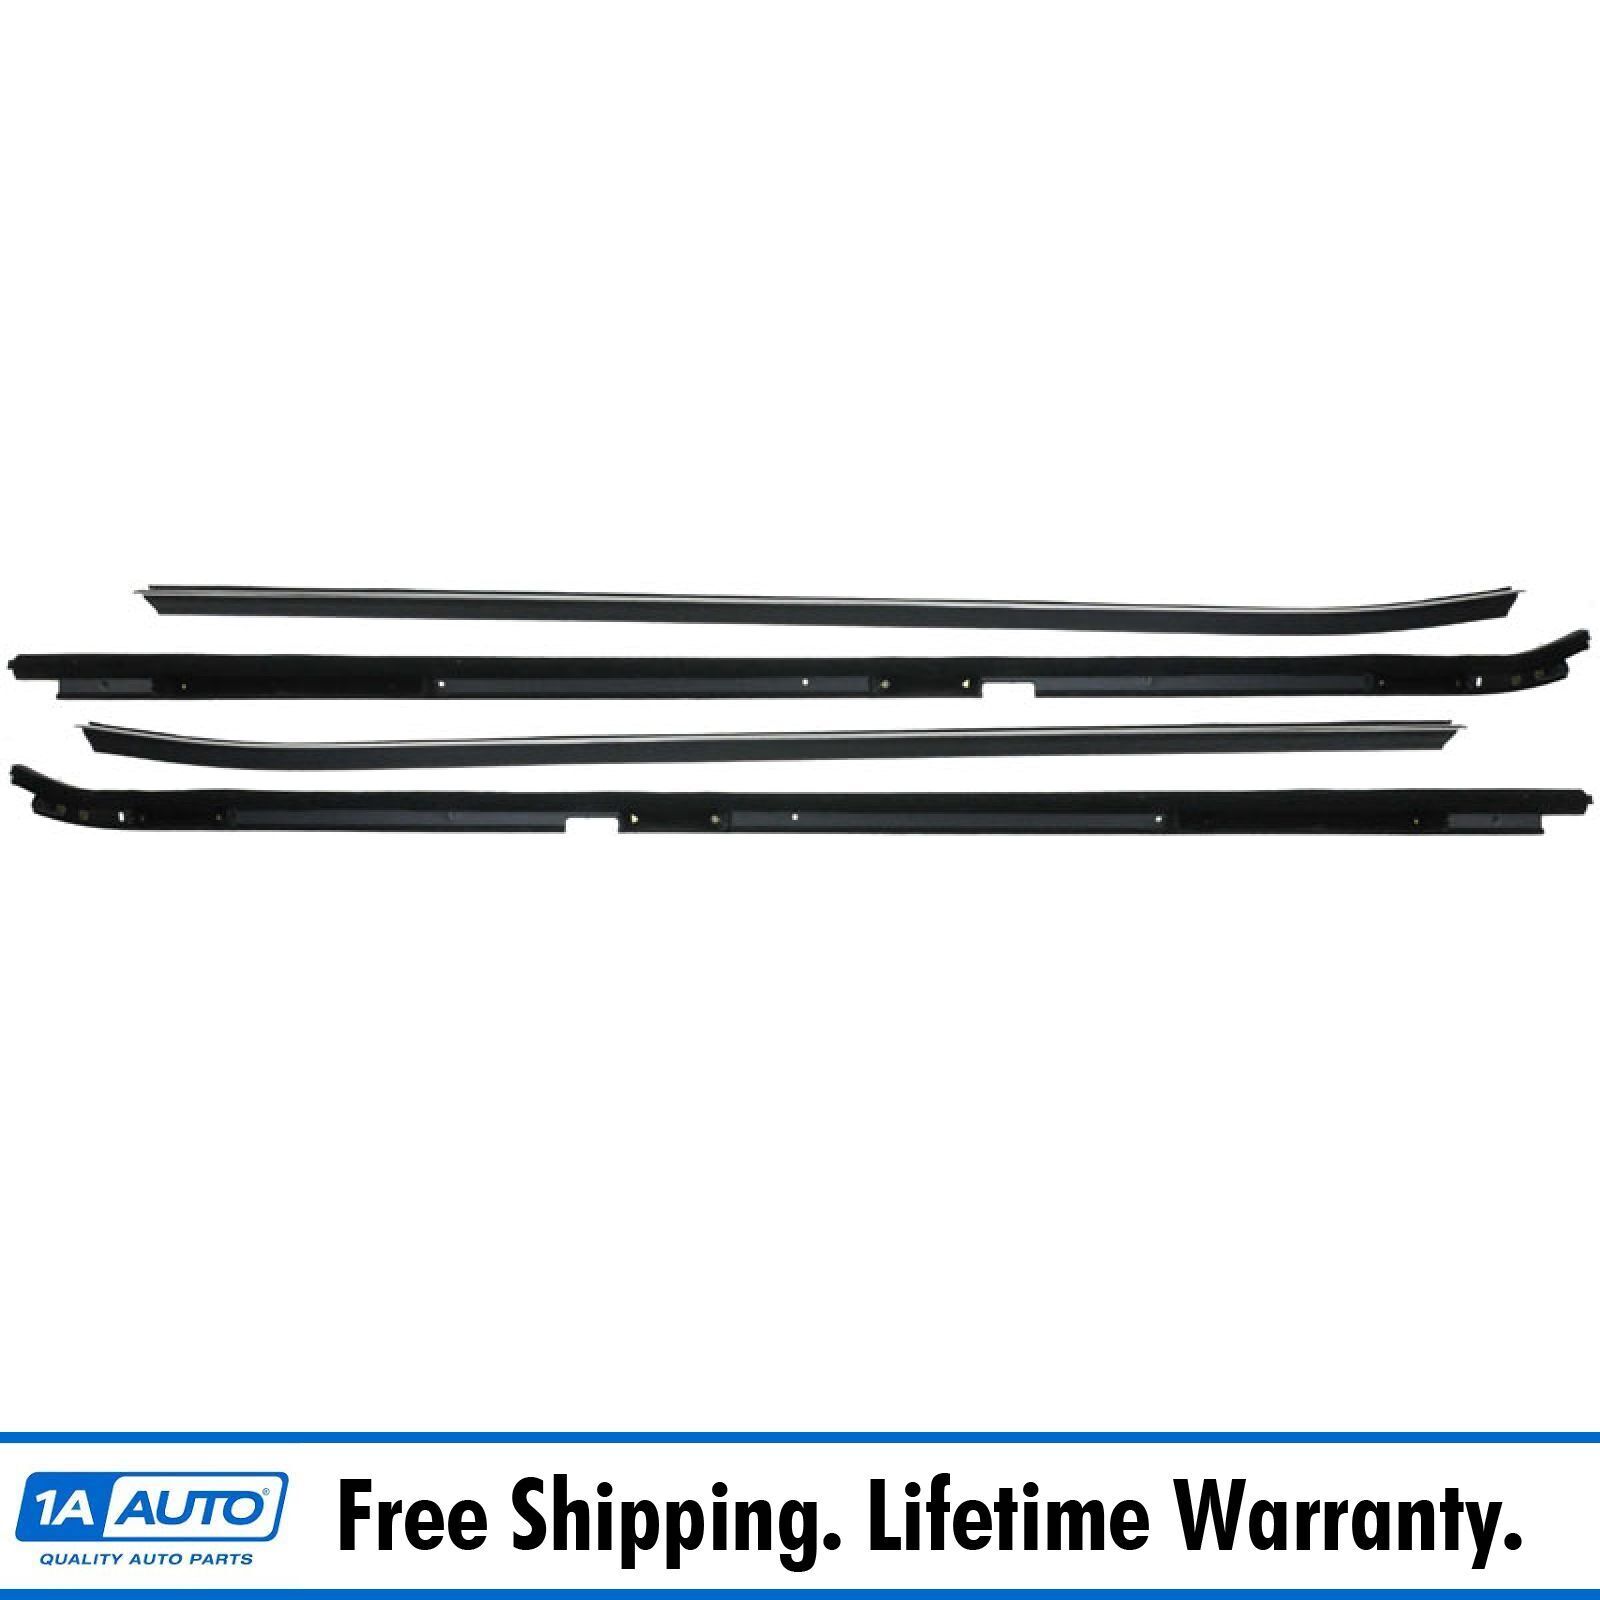 Inner & Outer Window Sweep Felts Seals Weatherstrip 4 Piece Kit Set for Buick